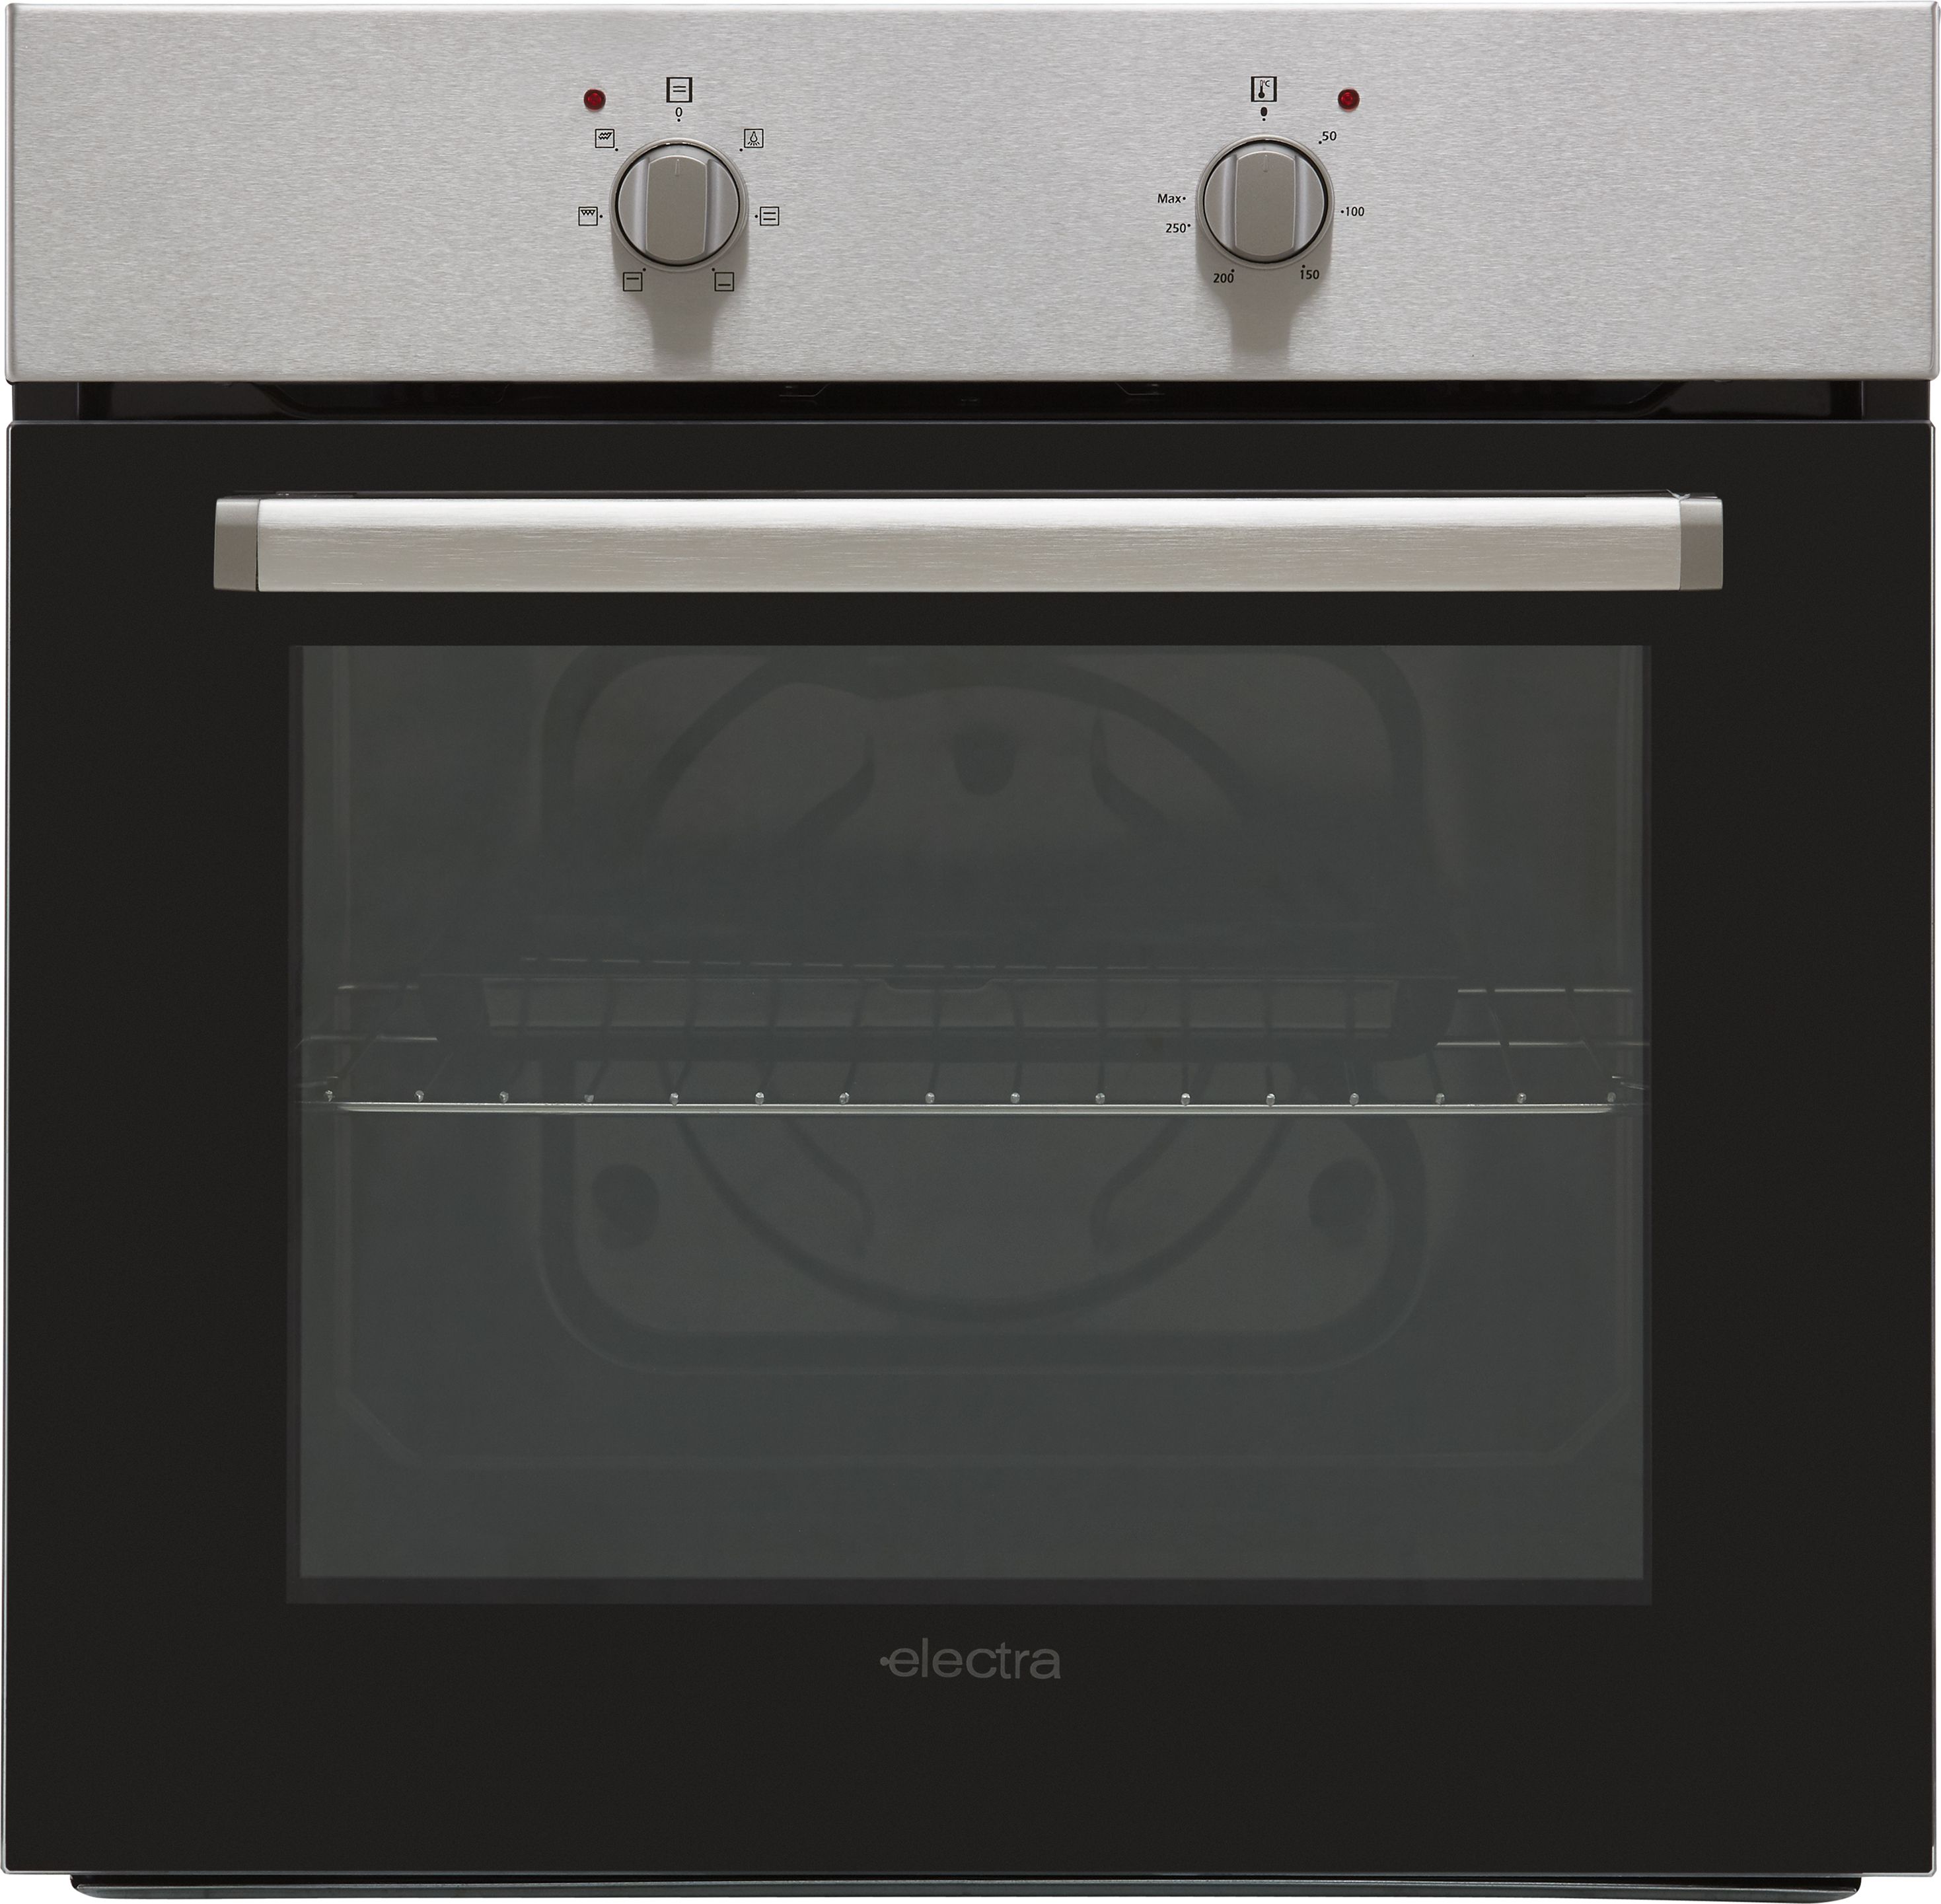 Electra BIS72SS Built In Electric Single Oven - Stainless Steel - A Rated, Stainless Steel